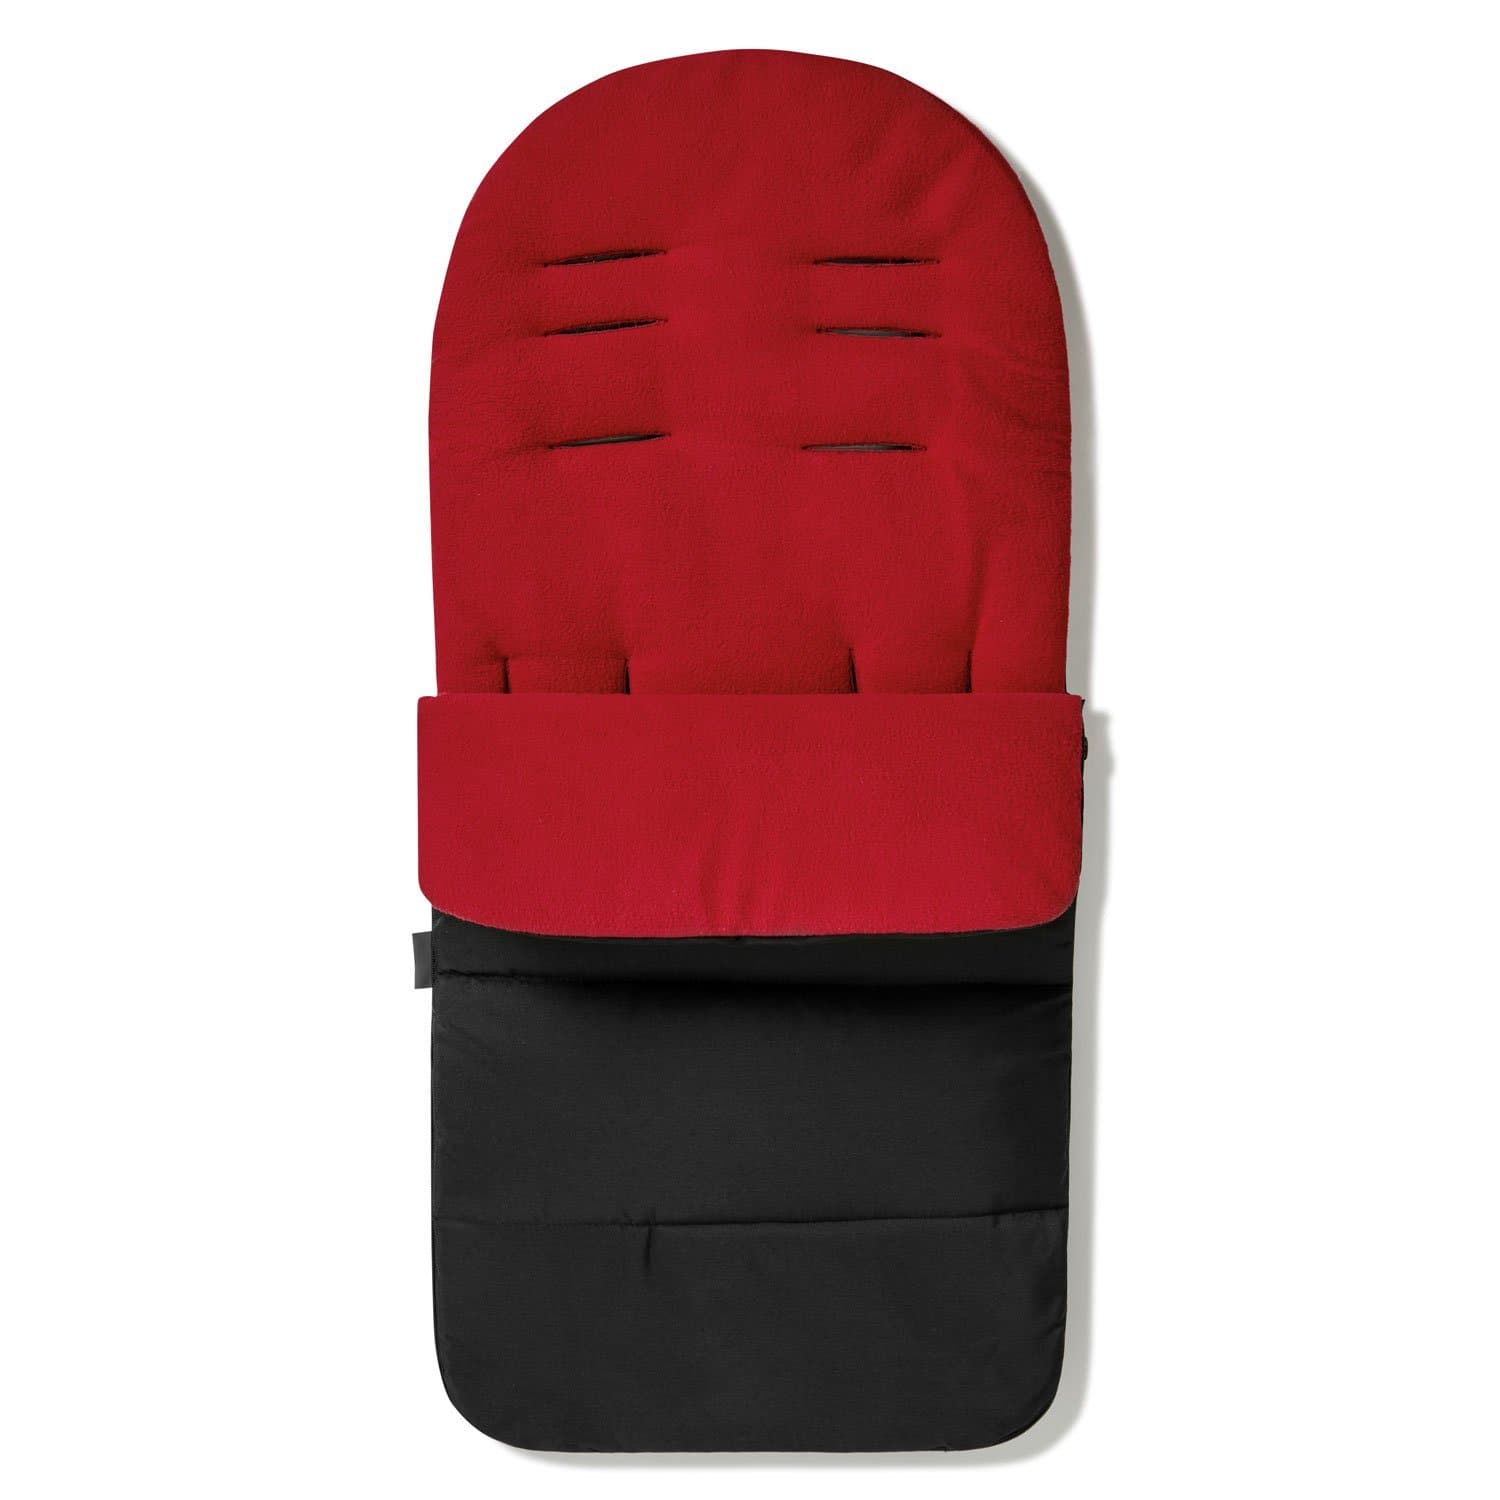 Premium Footmuff / Cosy Toes Compatible with Kinderkraft - Fire Red / Fits All Models | For Your Little One